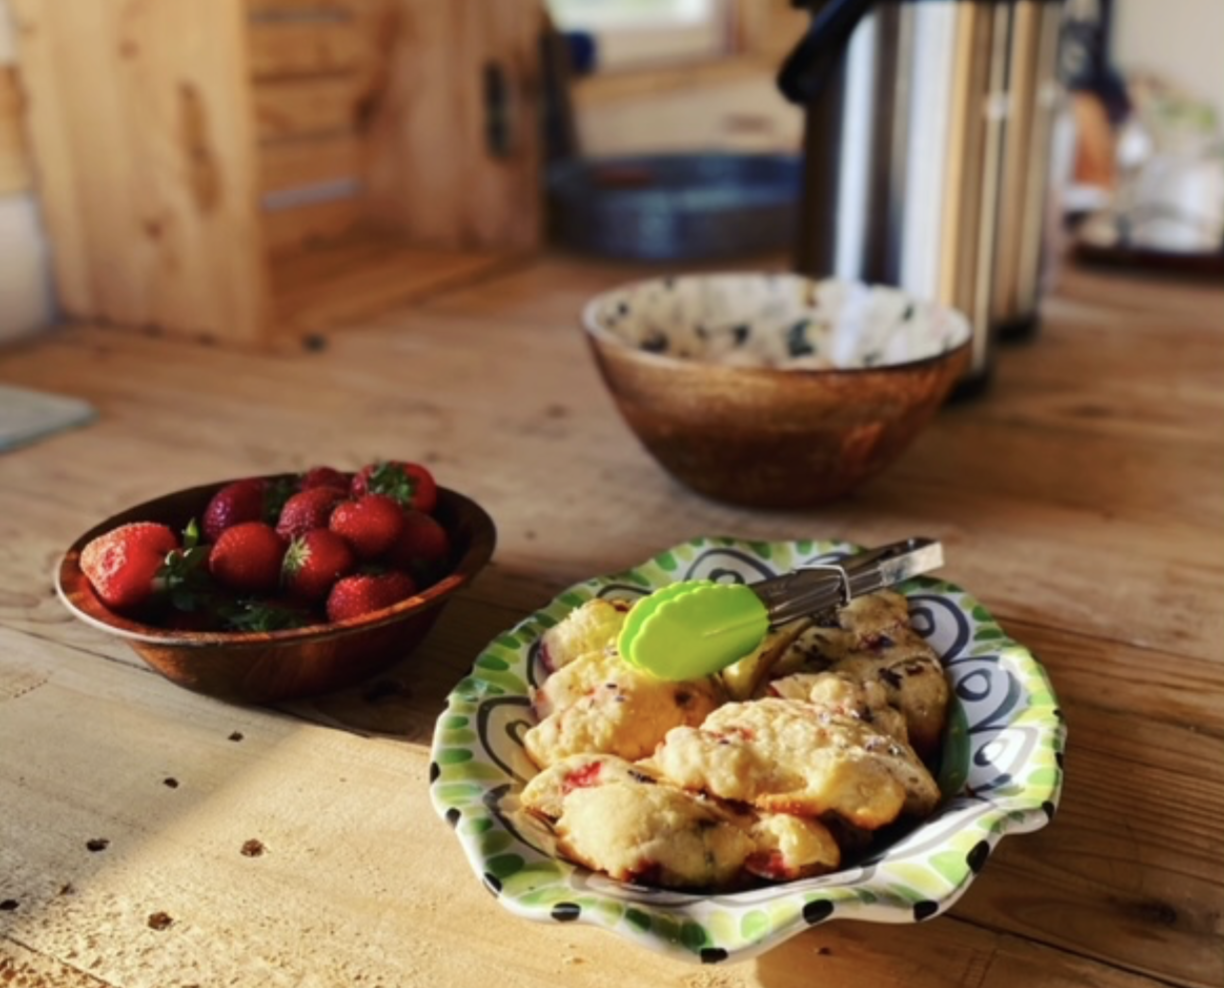 Fresh baked scones and fruit